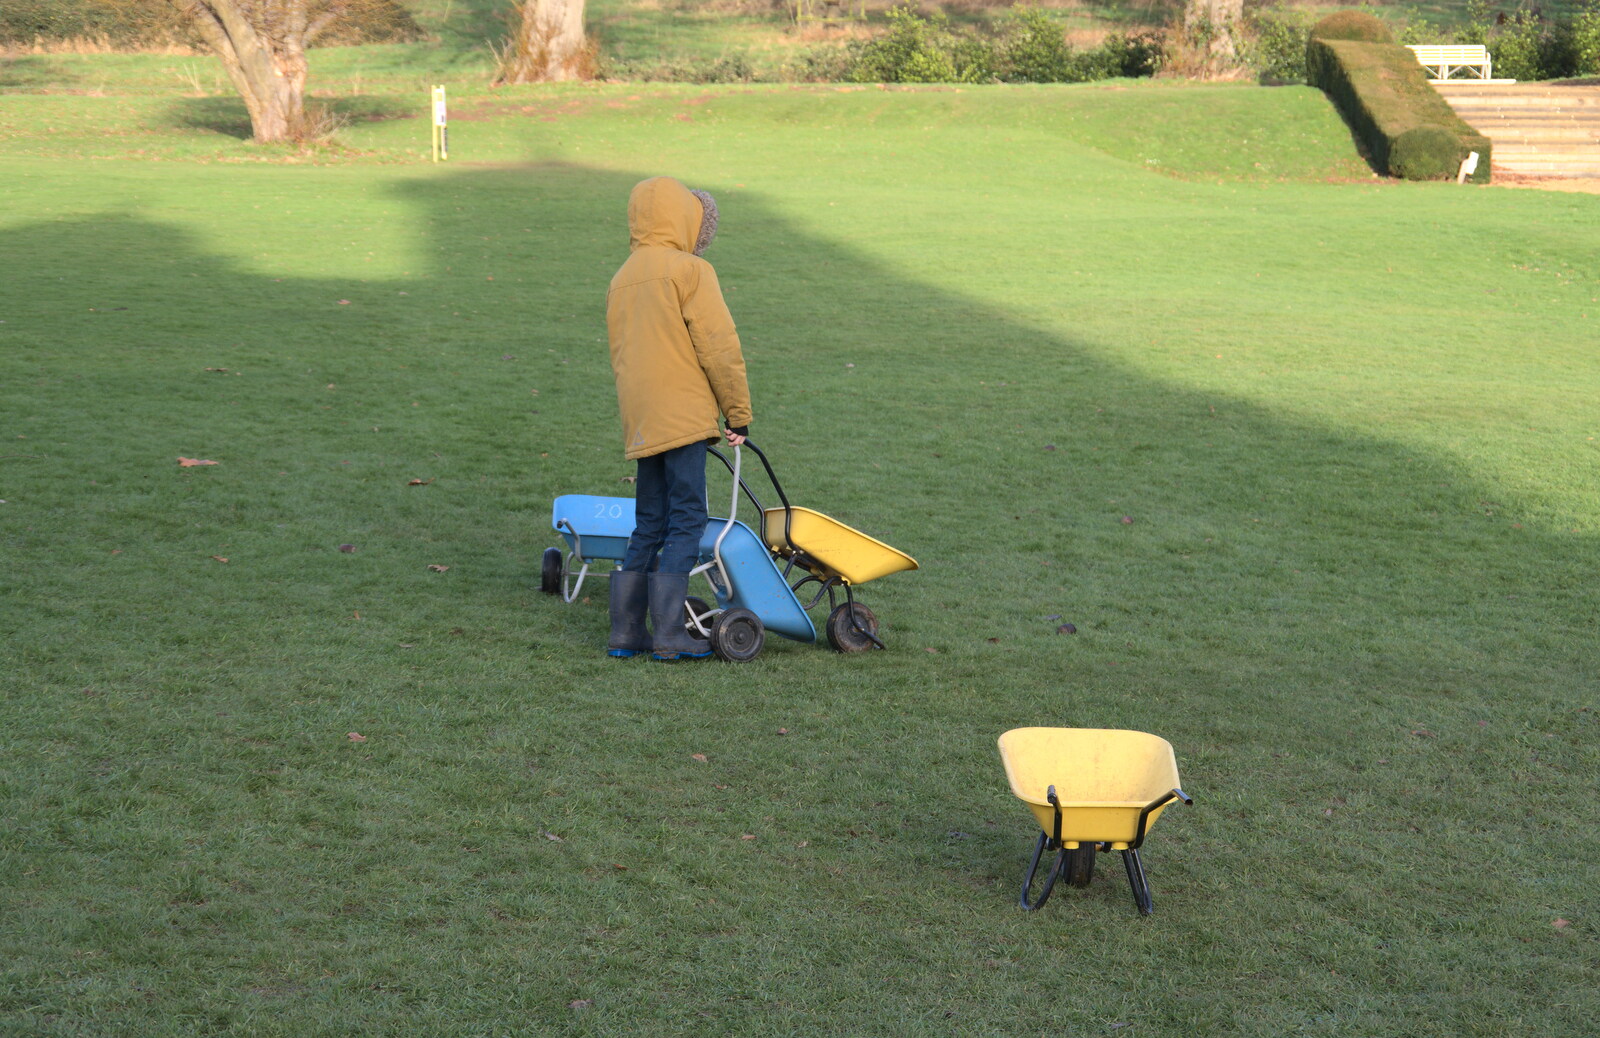 Harry collects small wheelbarrows from A Visit to Blickling Hall, Aylsham, Norfolk - 9th January 2022